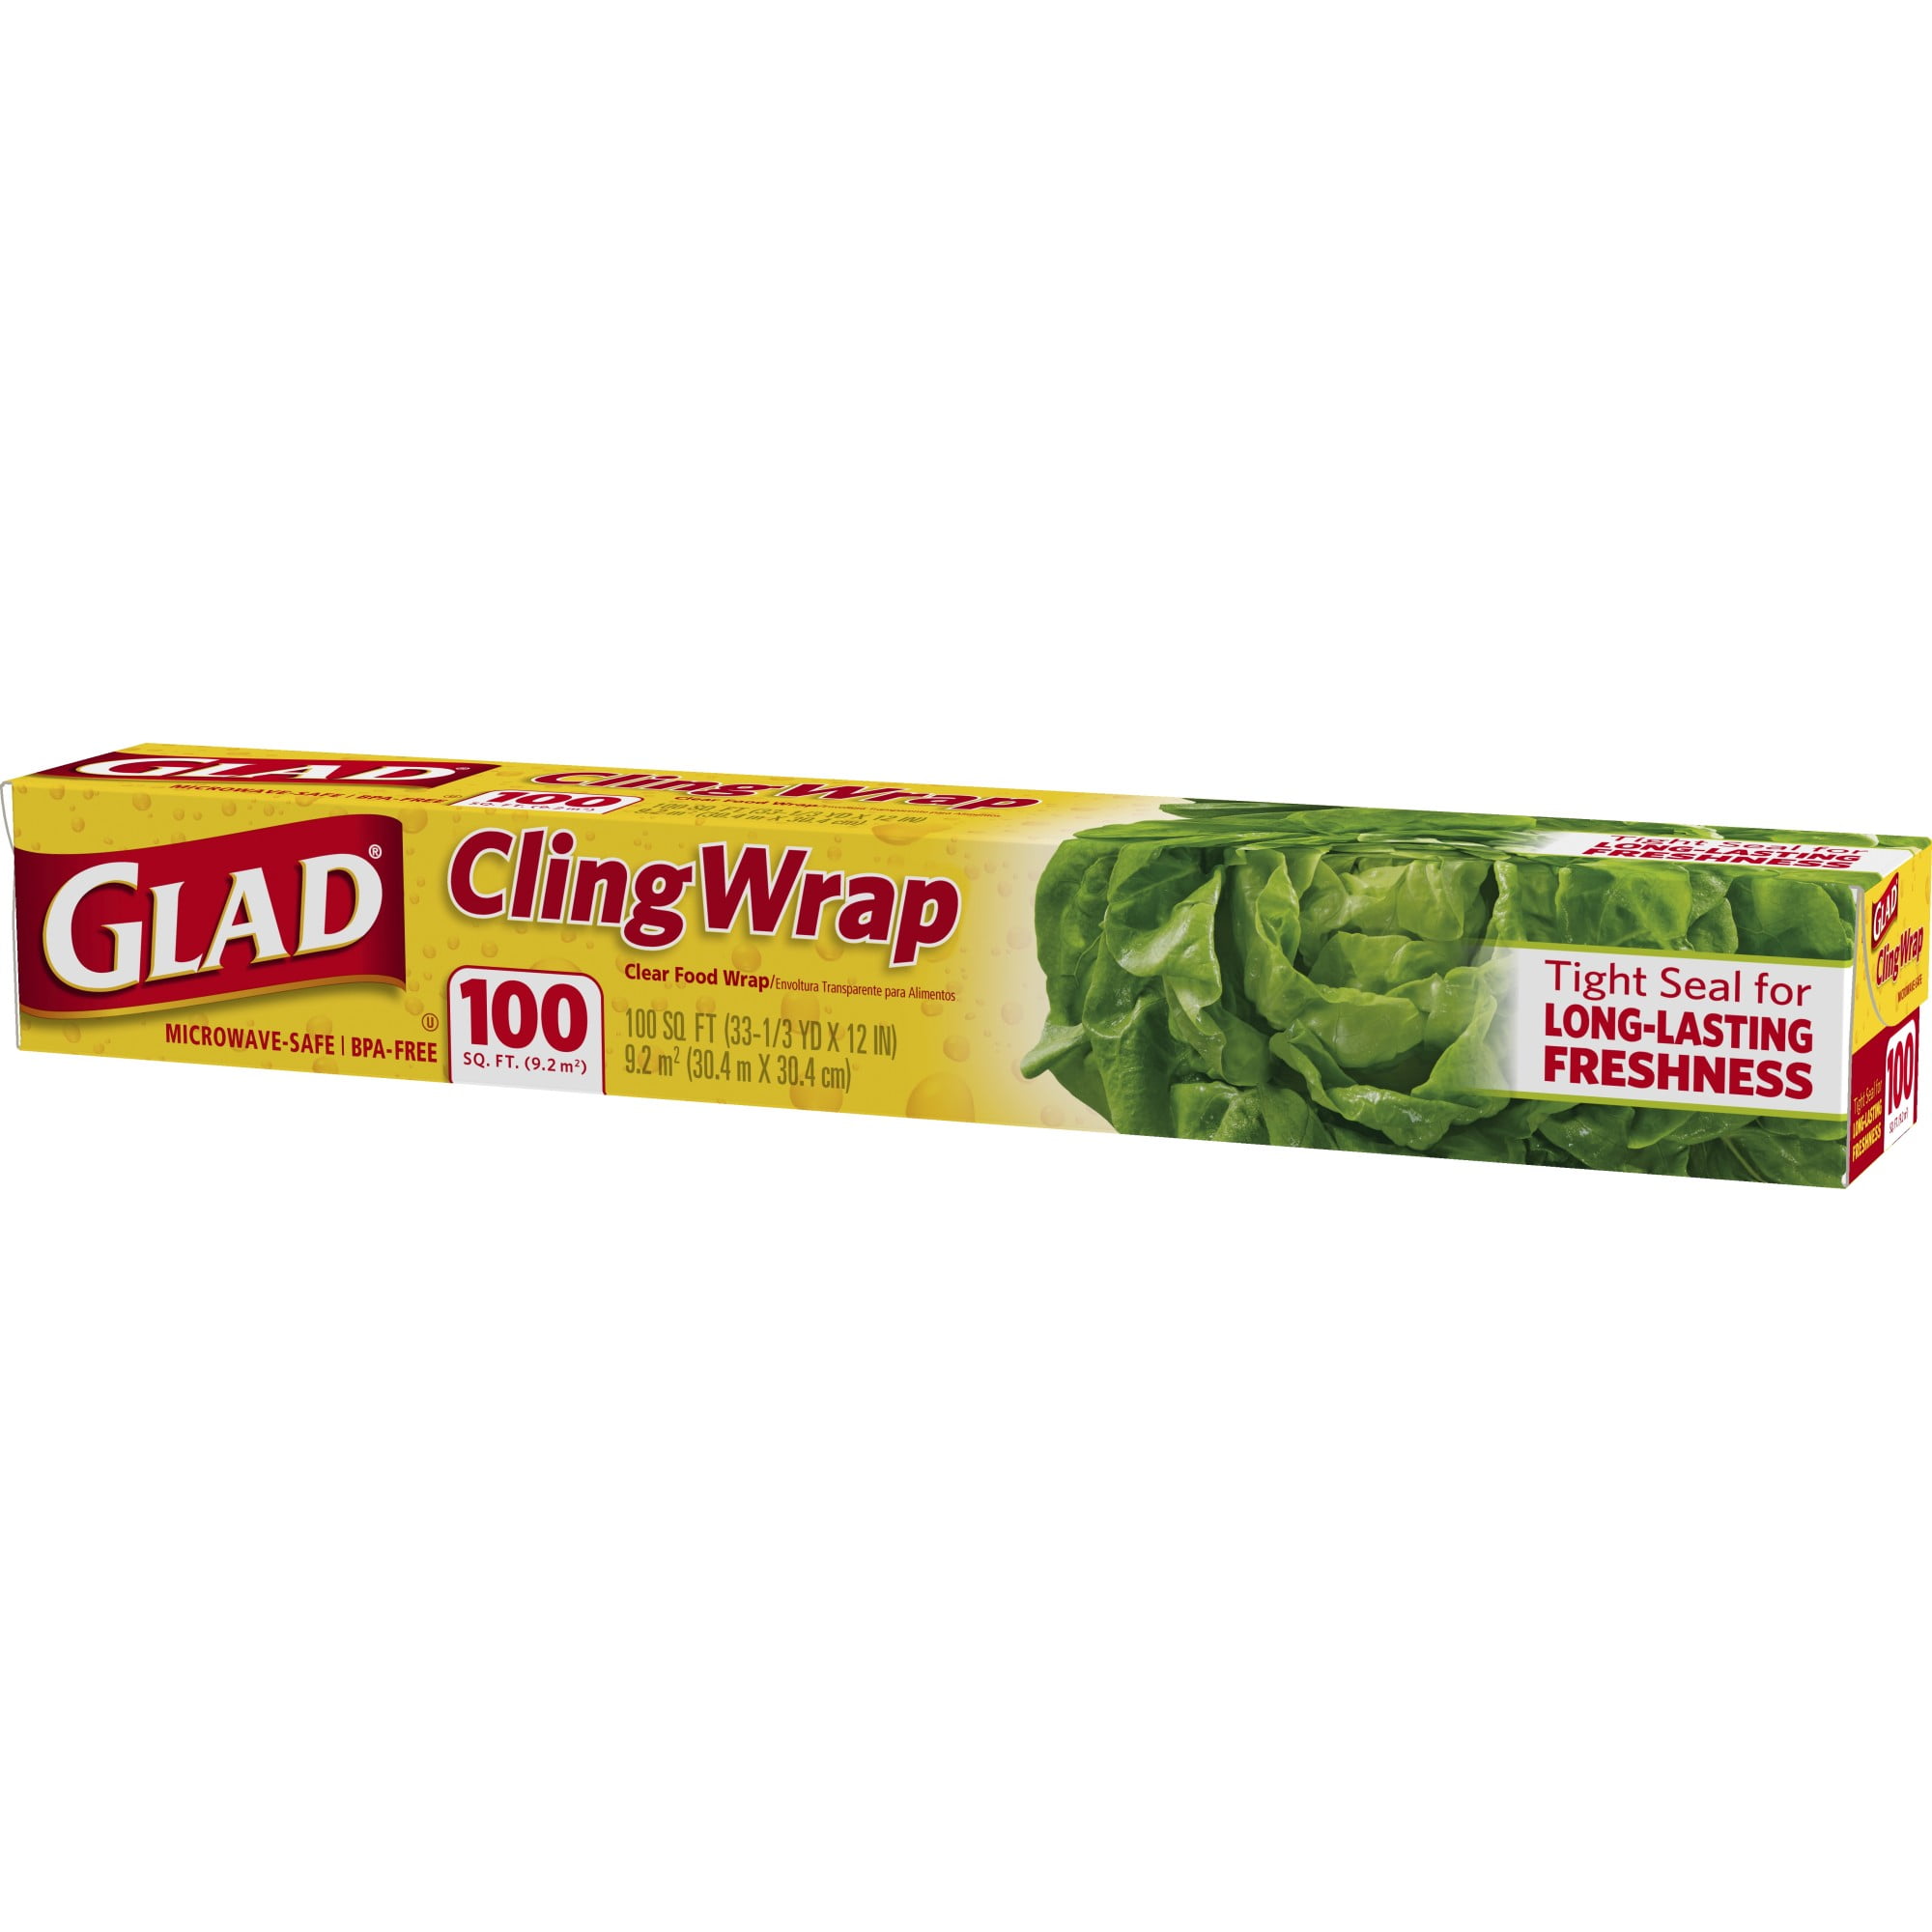 Tame Unruly Cling Wrap with These Plastic Whispering Tips « Food